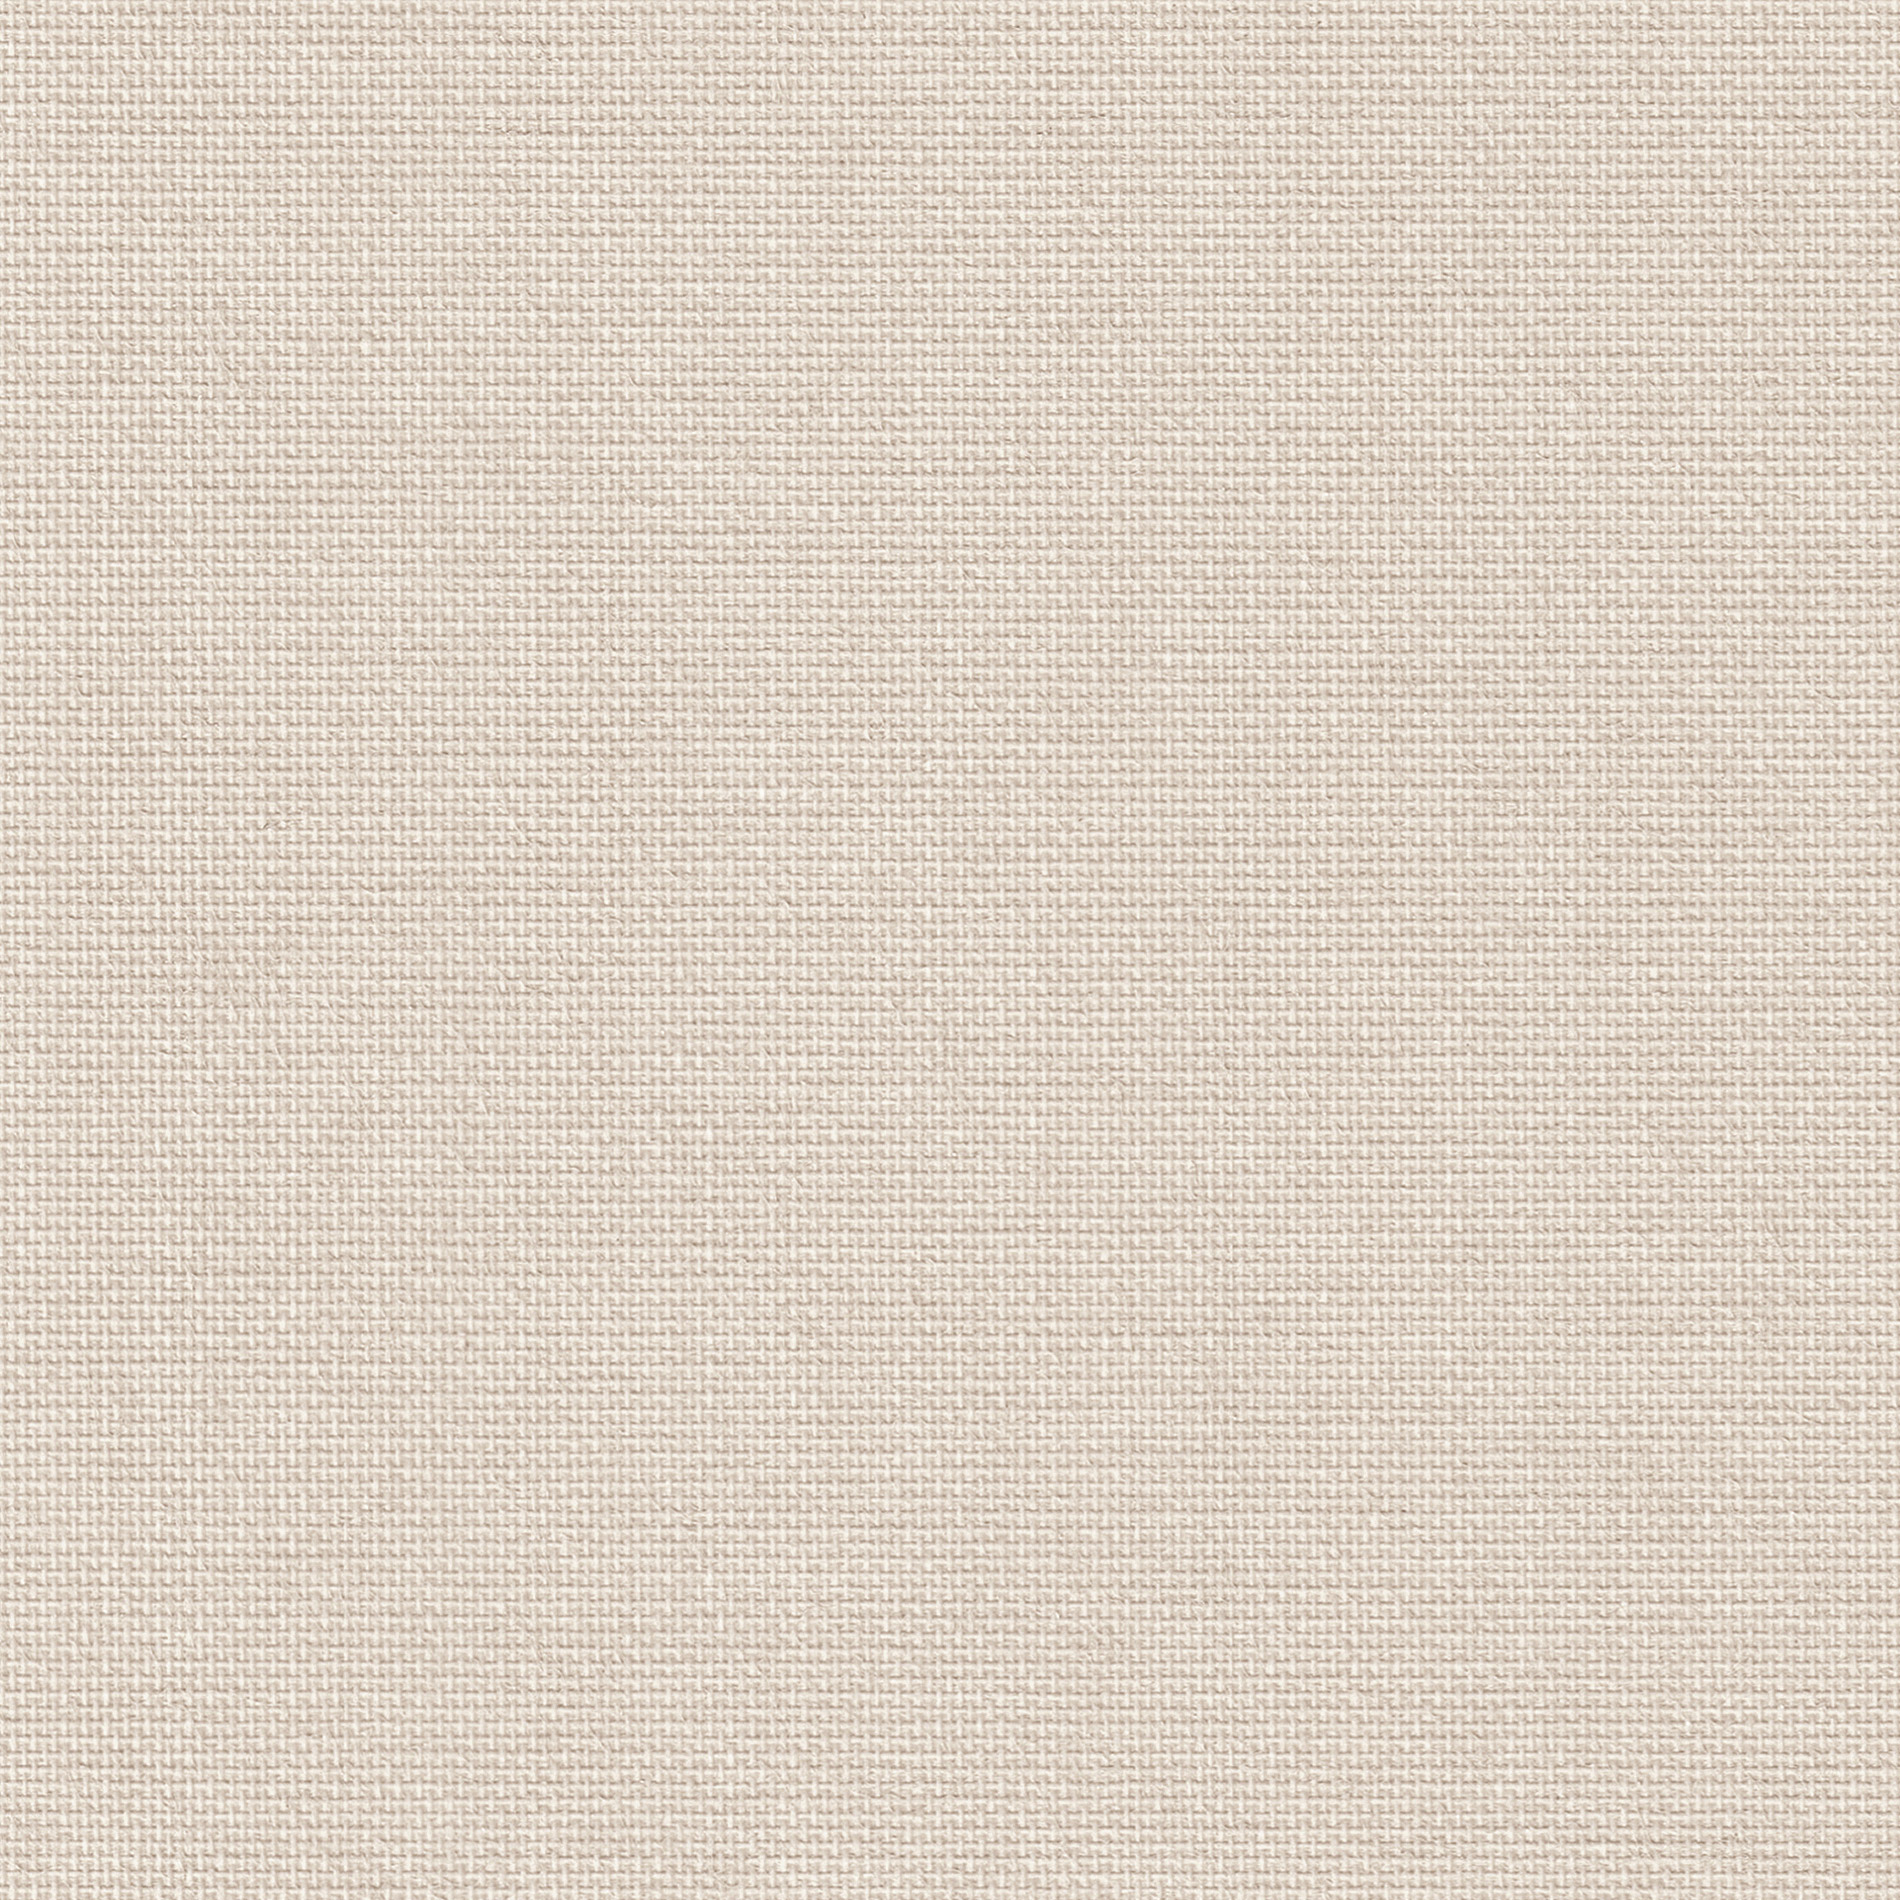 Altex - Fabric - MUENCHEN - Bleached Sand - RF-MUENCHEN-5401